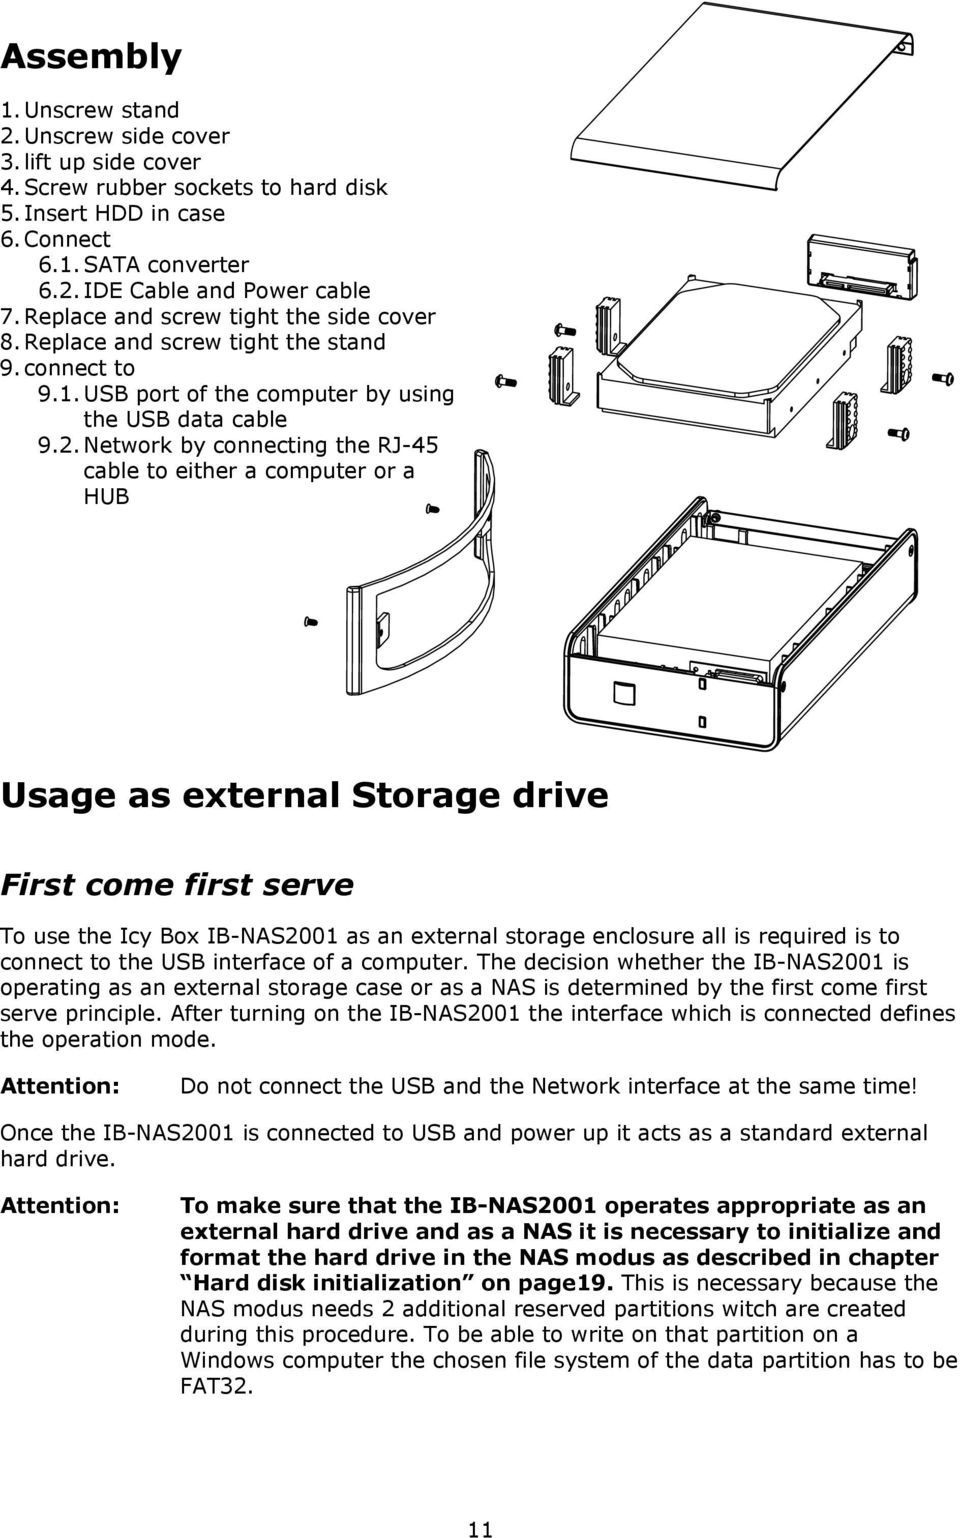 Network by connecting the RJ-45 cable to either a computer or a HUB Usage as external Storage drive First come first serve To use the Icy Box IB-NAS2001 as an external storage enclosure all is